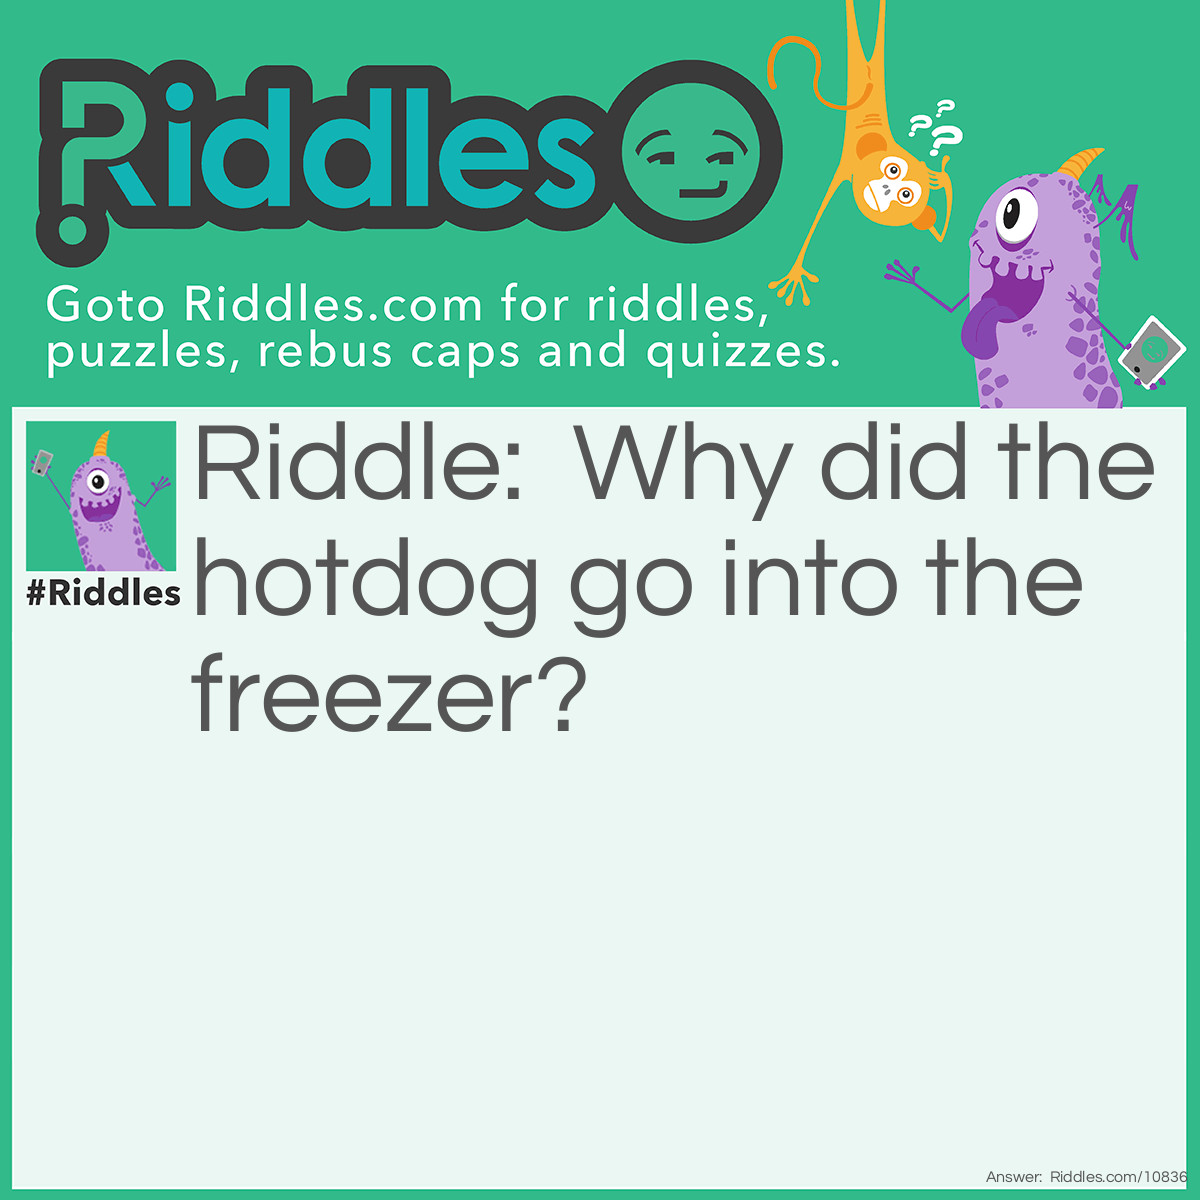 Riddle: Why did the hotdog go into the freezer? Answer: Because it wanted to cool down.